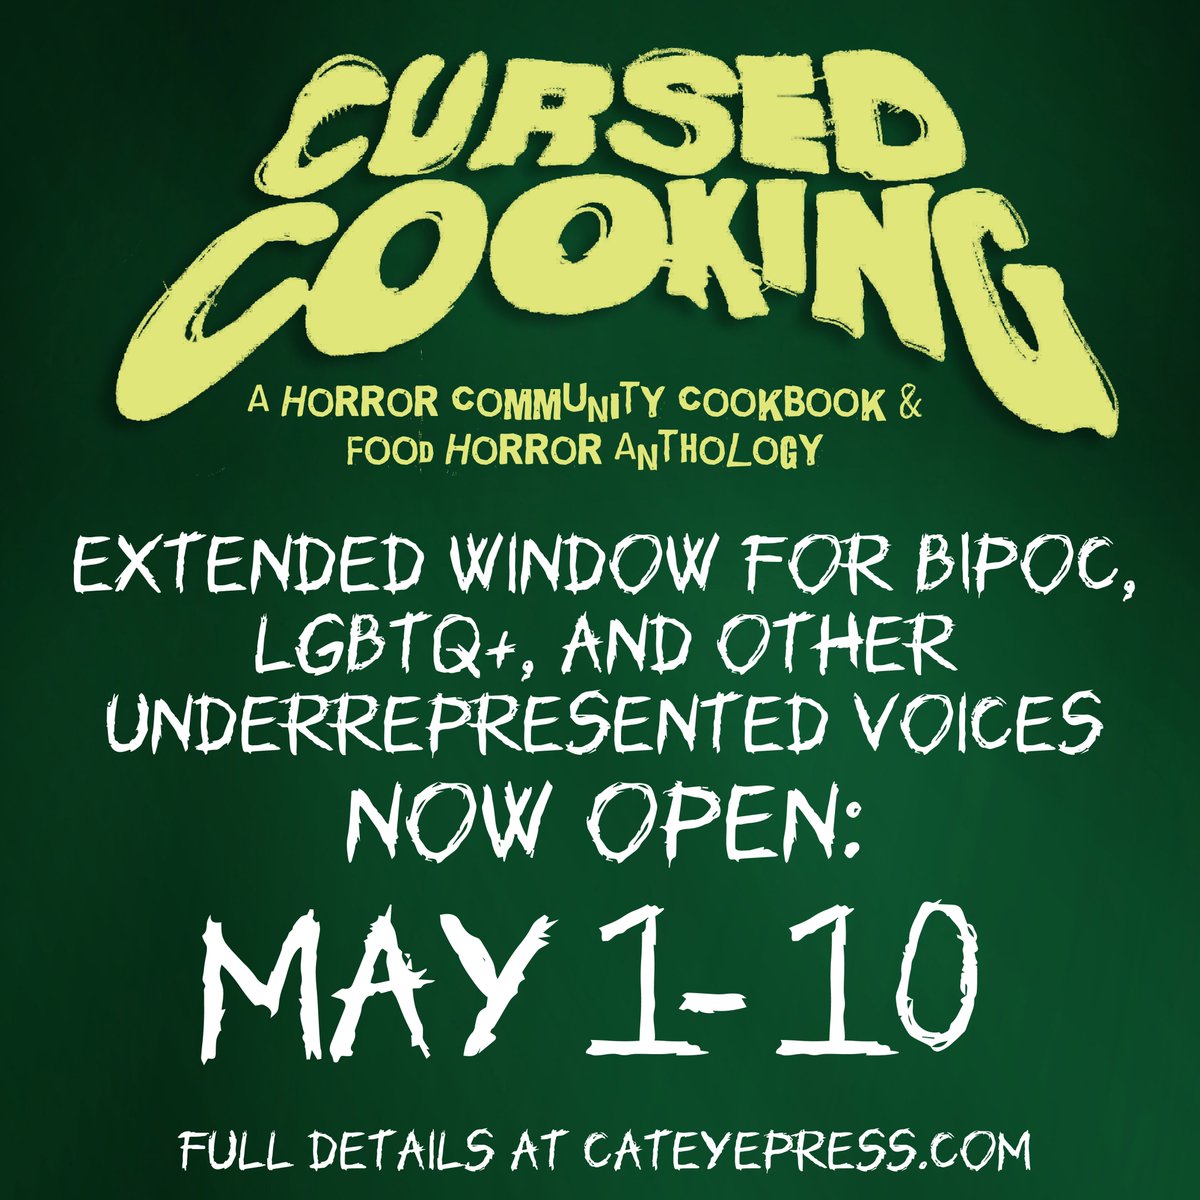 Cursed Cooking's extended window for BIPOC, LGBTQ+, and other underrepresented voices closes this Friday, May 10 at 11:59 p.m. (last place on Earth). Be sure to get your food horror stories and real-world recipes in before then! Let's get cooking, #HorrorCommunity🔥